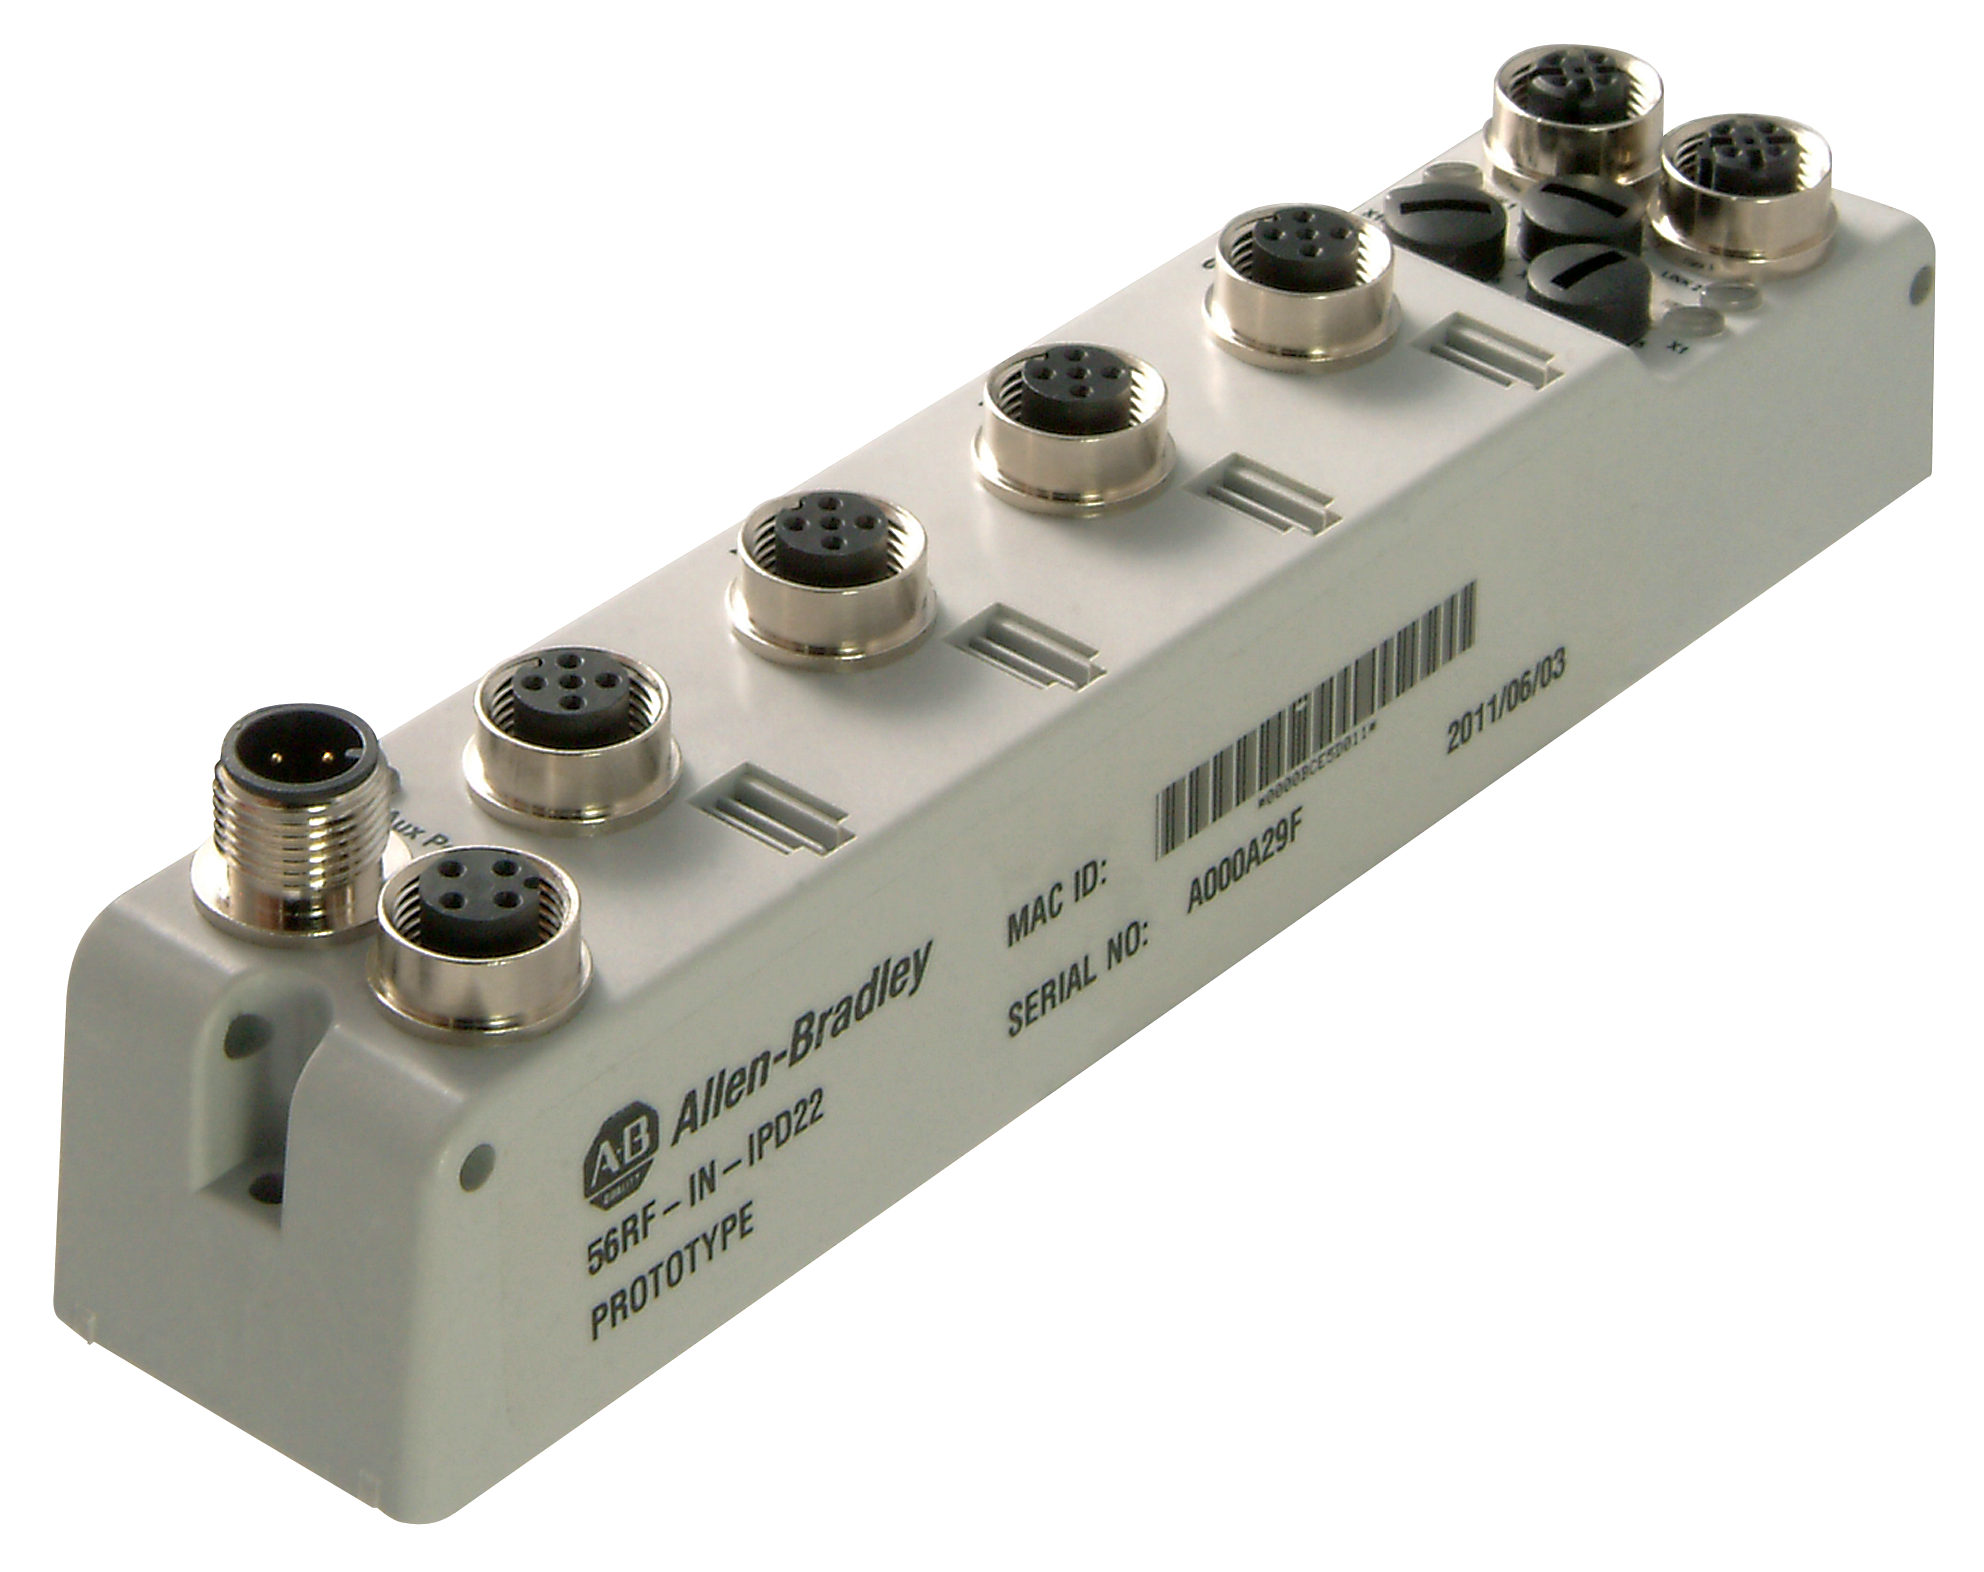 Rectangular 56RF EtherNet/IP Interface Blocks with 2 ports, input and output connections